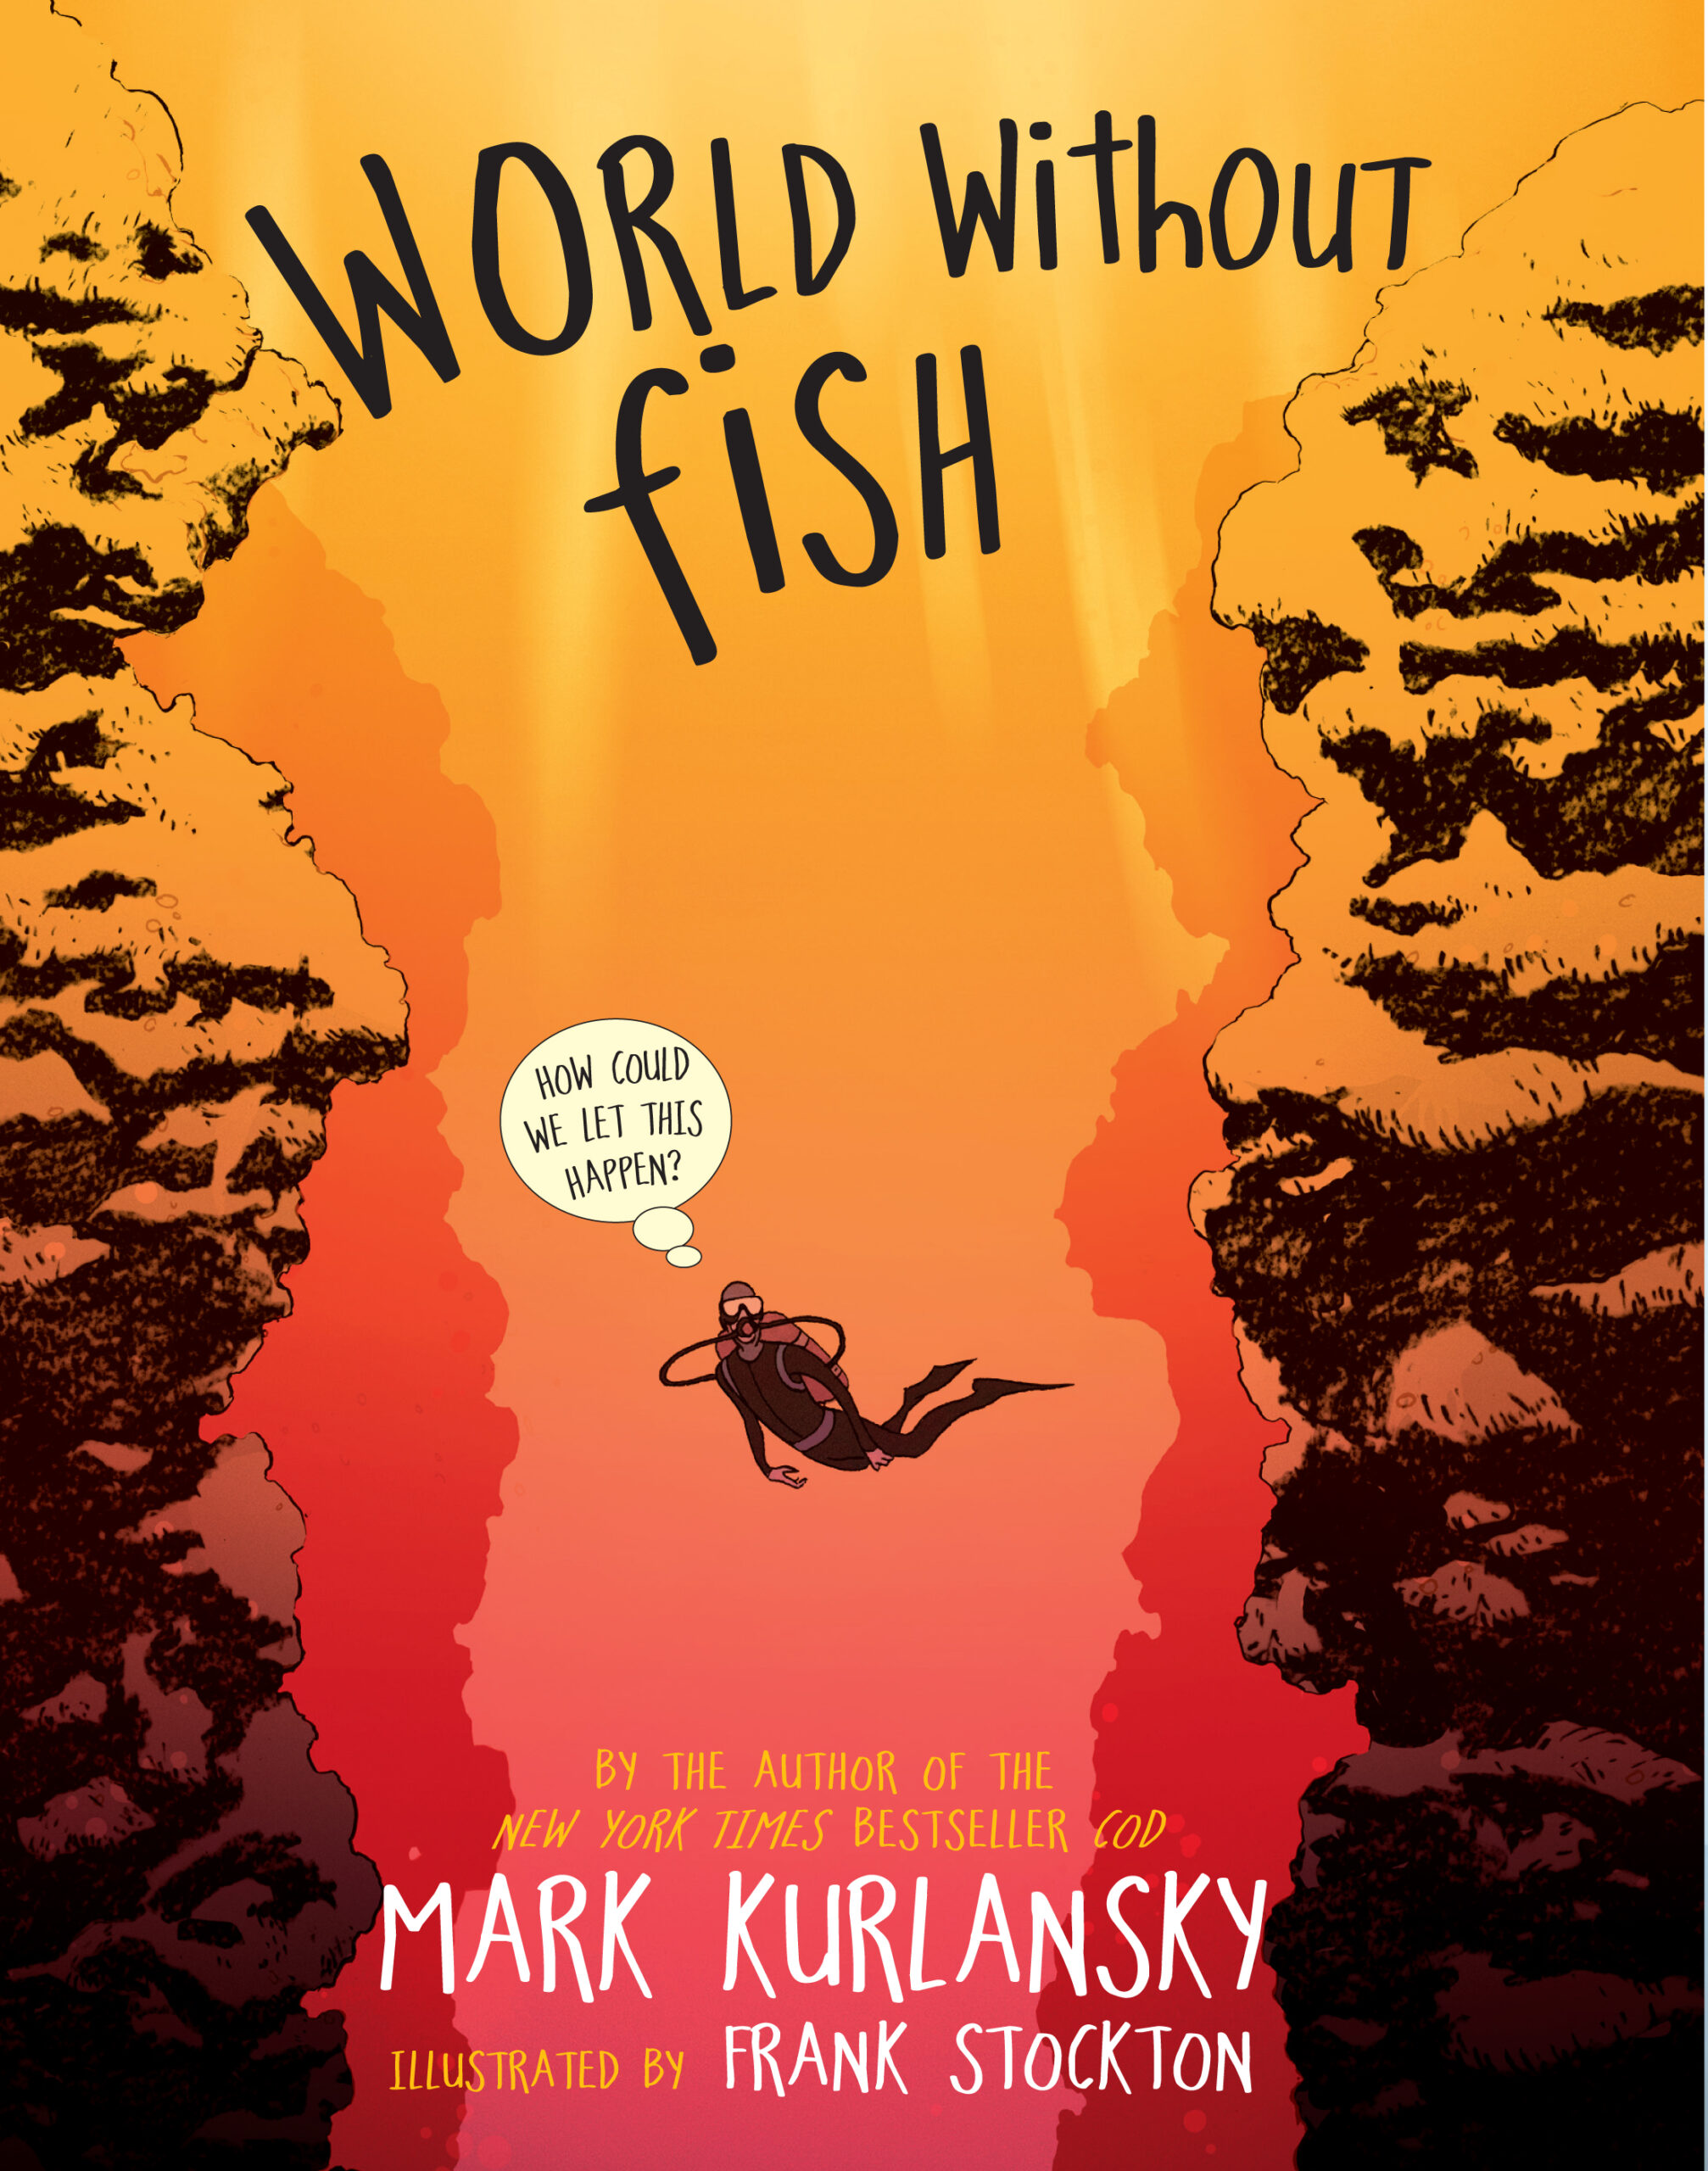 Cover of the book World Without Fish. Features an illustrated diver in the ocean on an orange background with the titular text in large black letters.